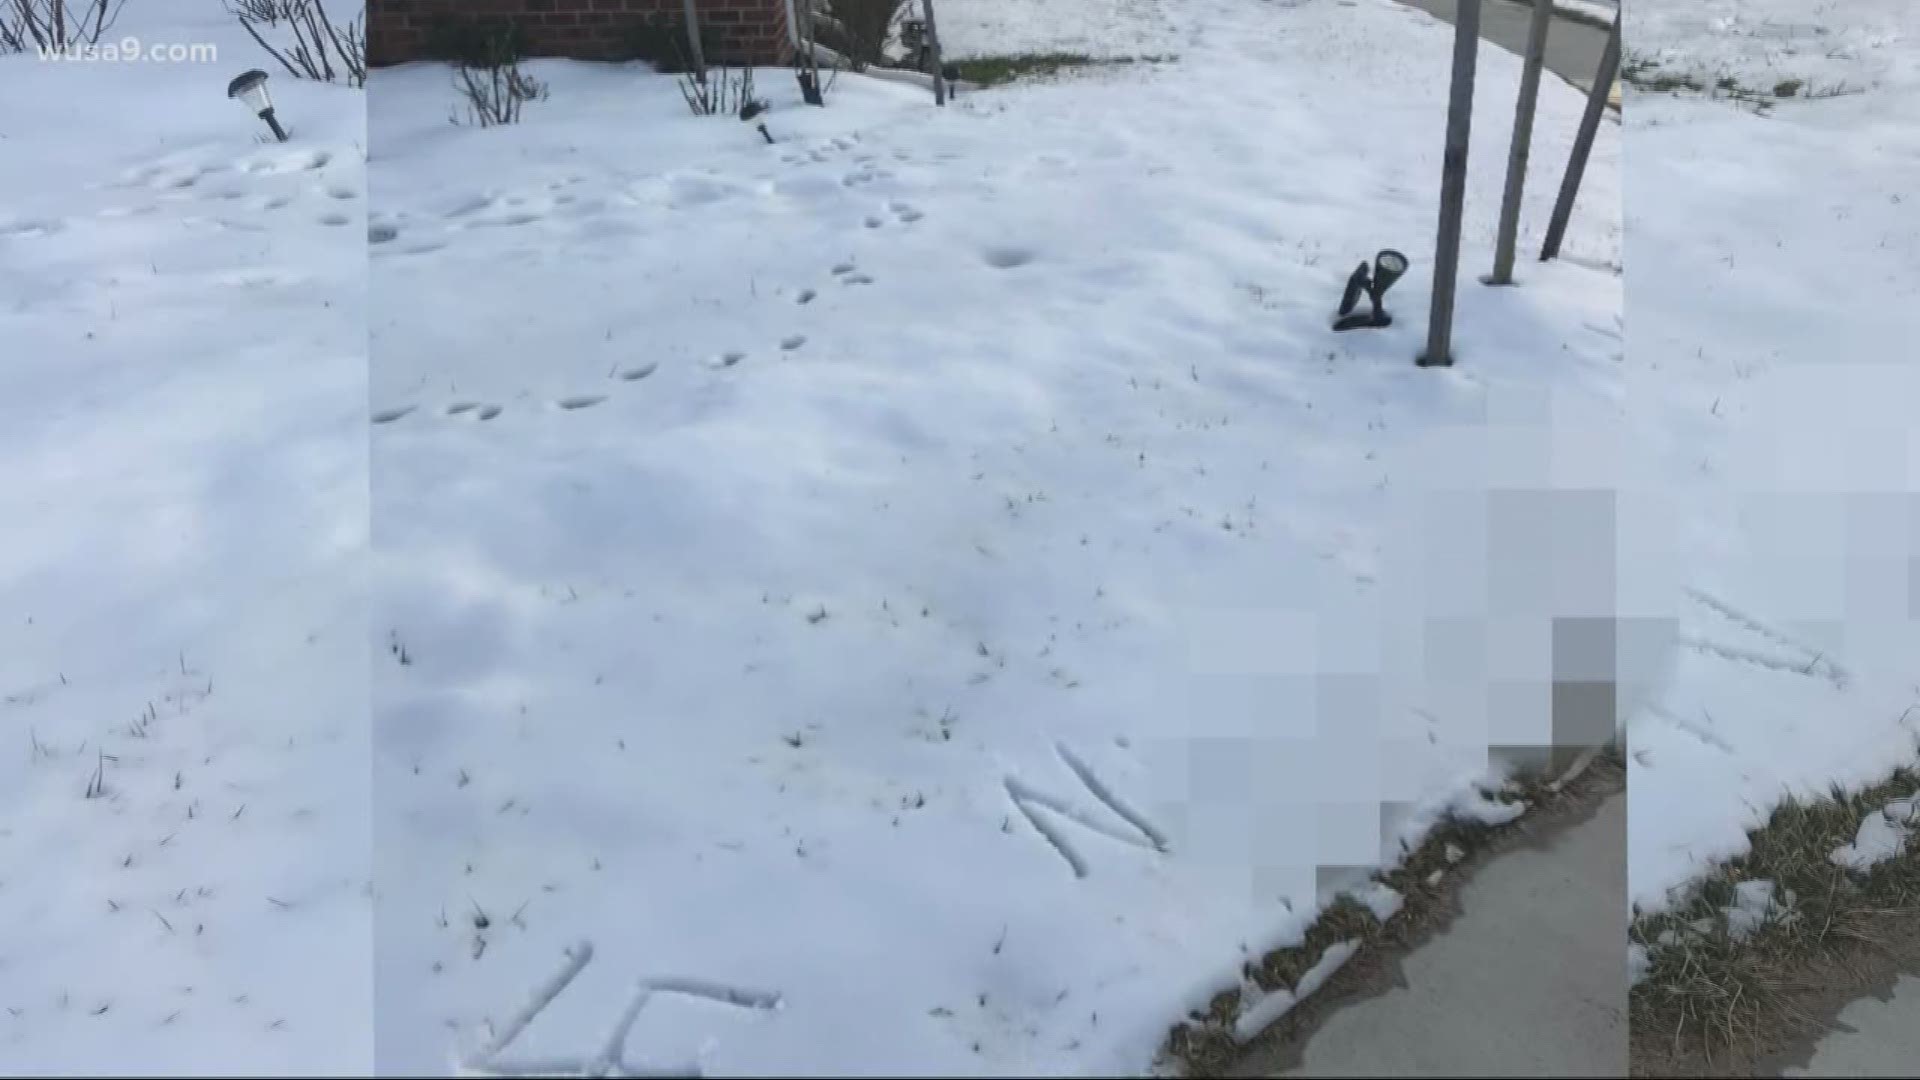 An African American family in Loudoun County is distraught over hateful, racist  messages left in the snow. A swastika and the N-word was written in huge letters next to their house.